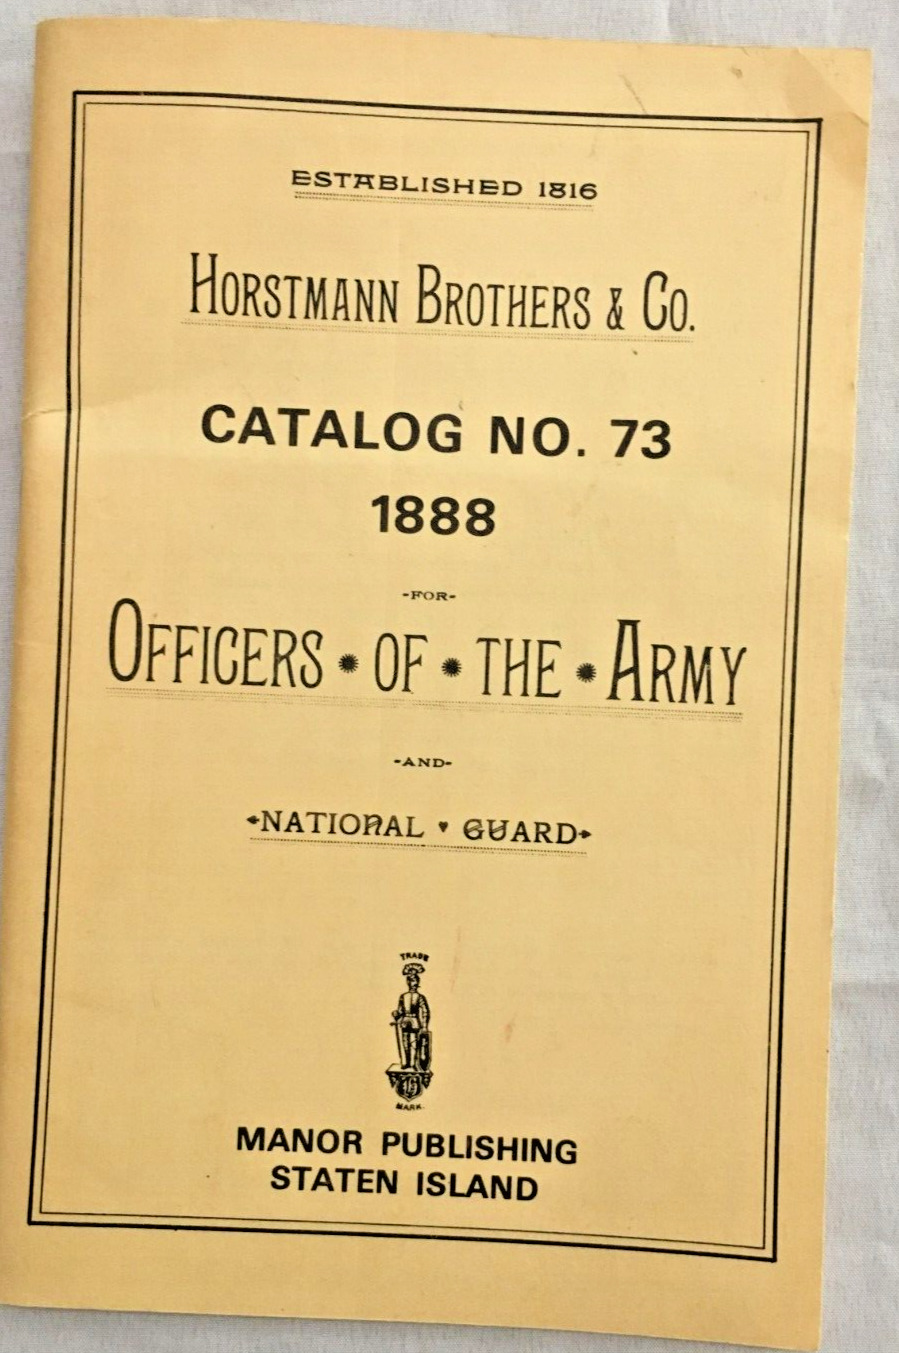 Horstmann Brothers & Co. Catalog # 73 1888 OFFICERS OF THE ARMY revised 1974